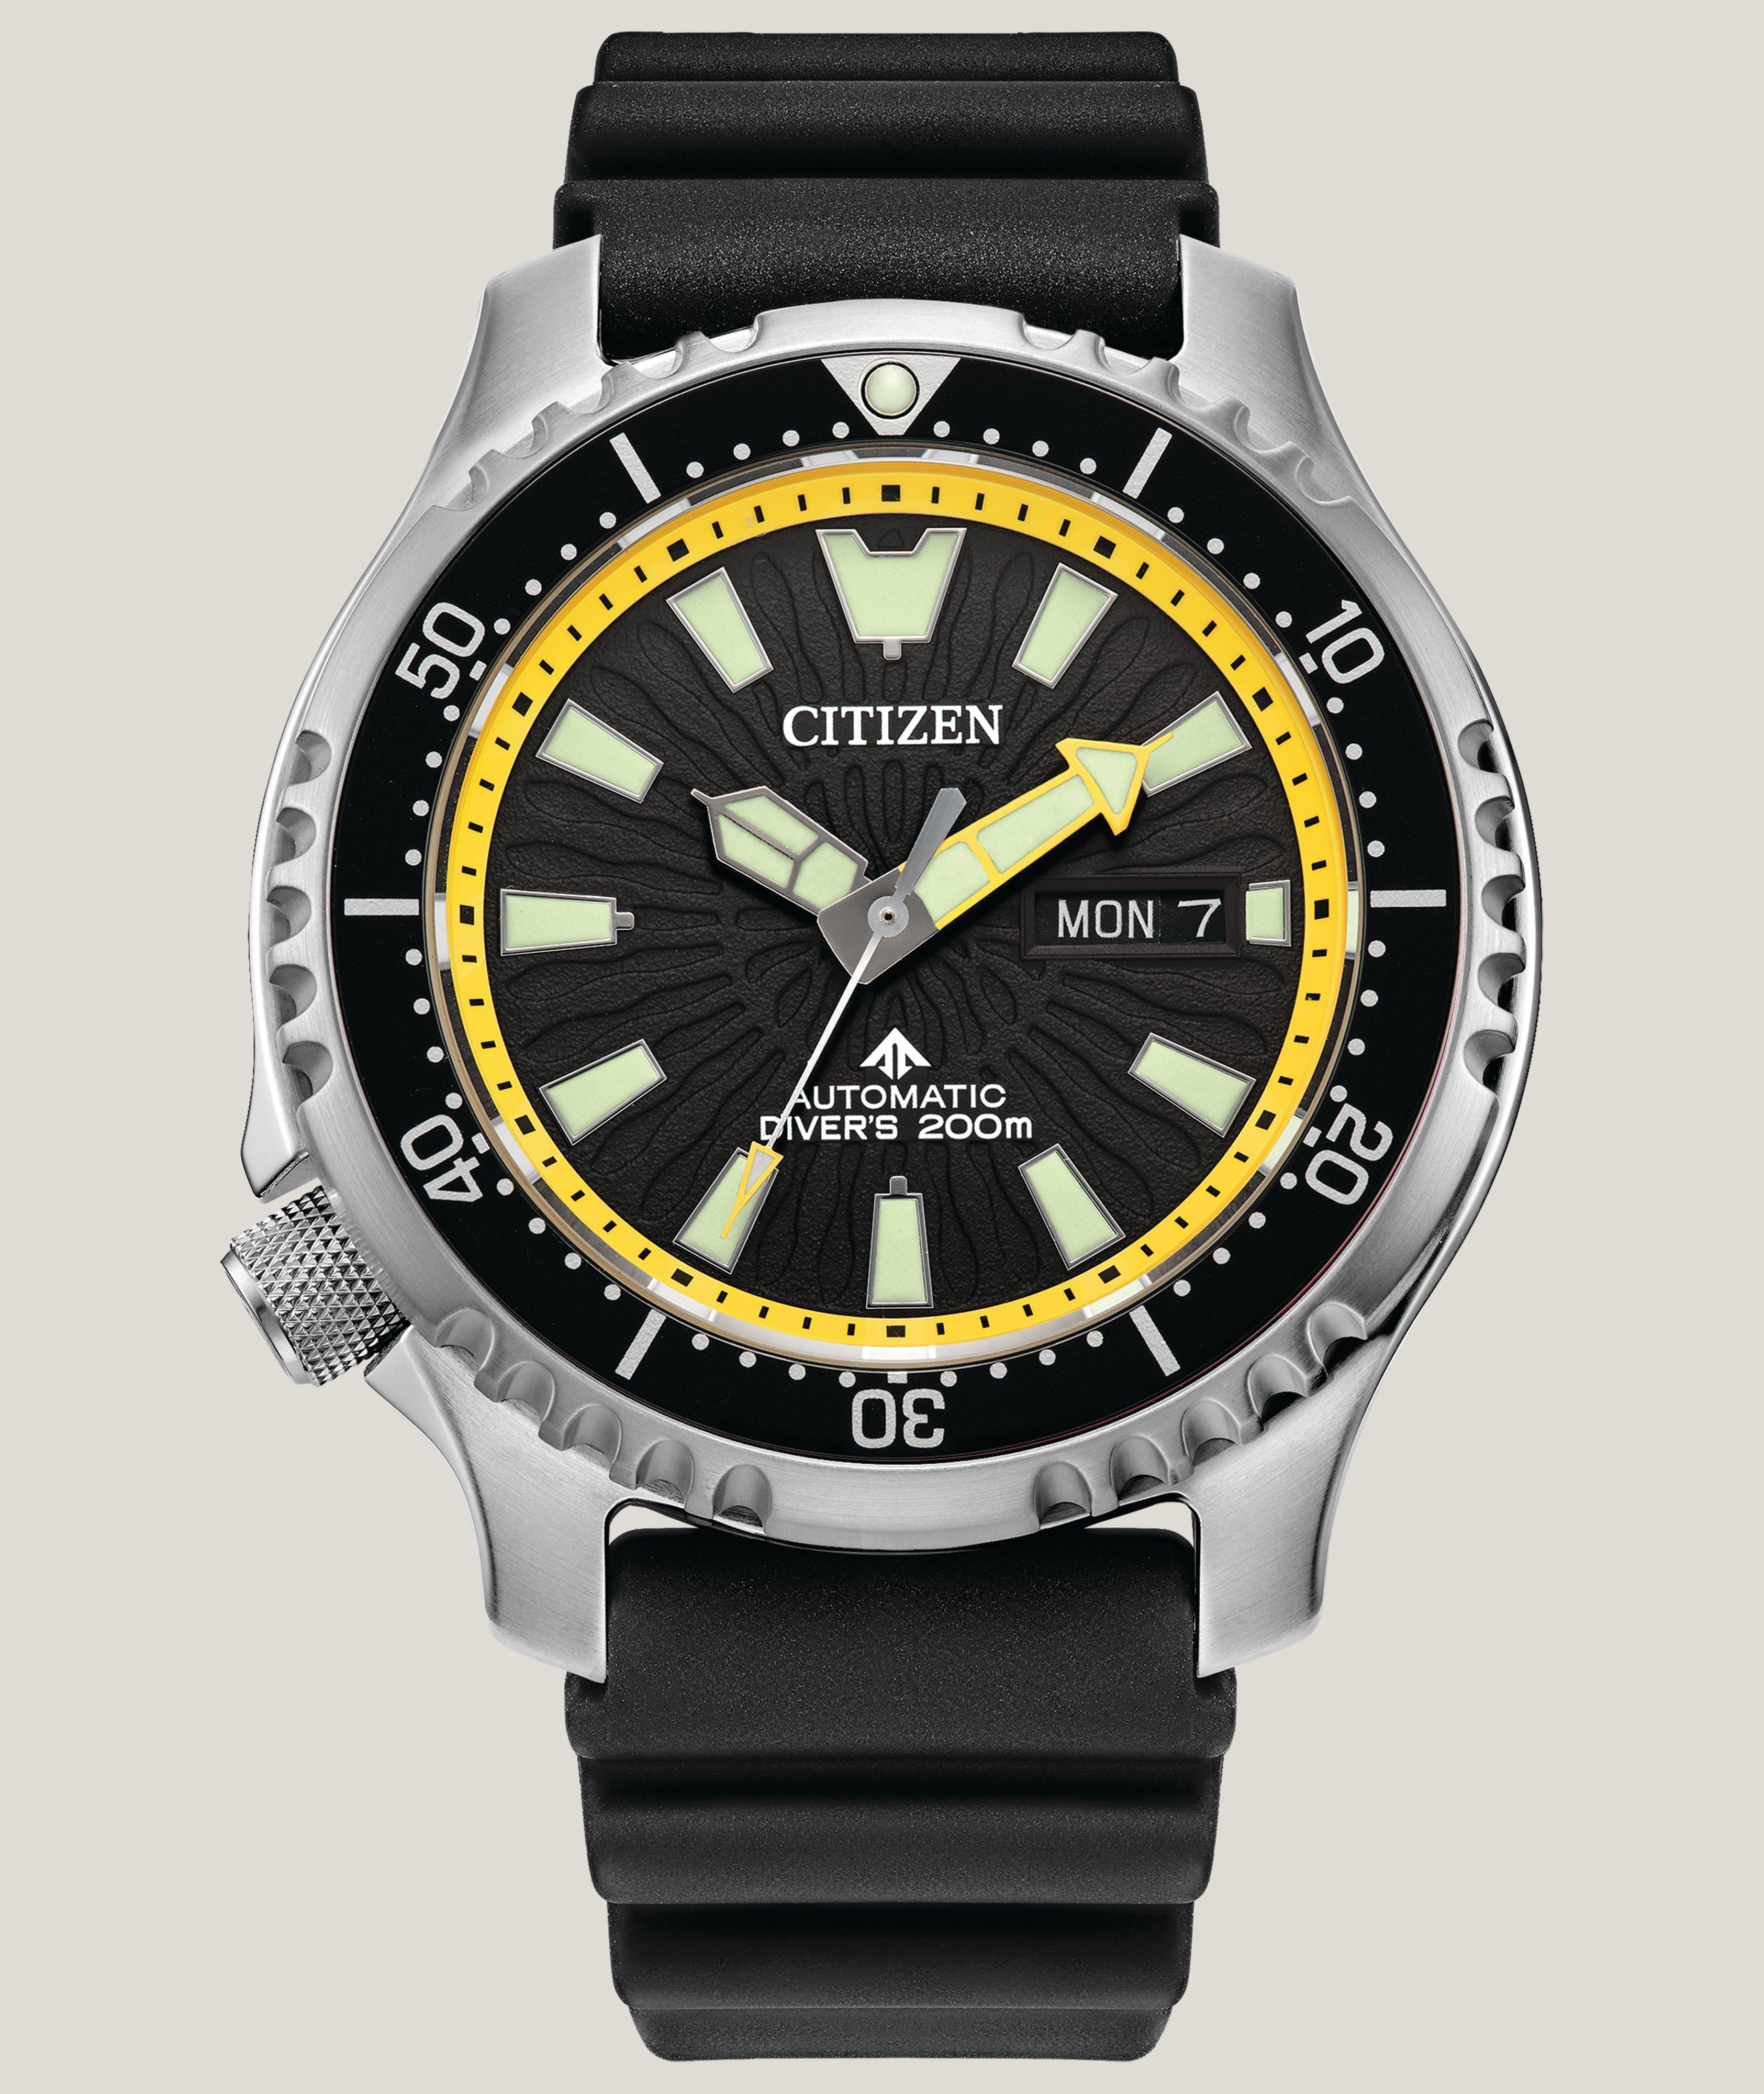 Promaster Dive Watch image 0